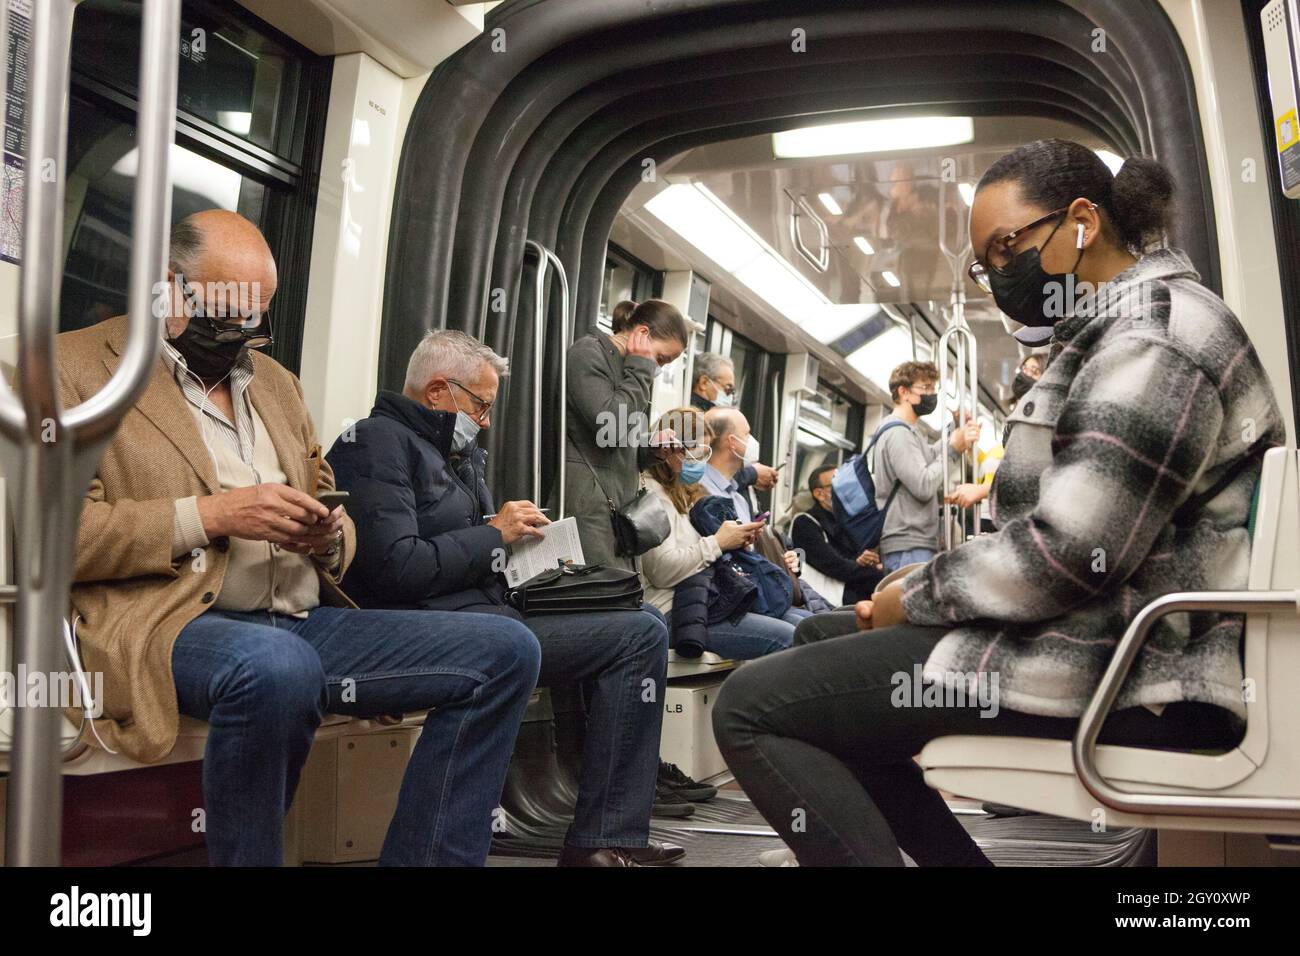 Paris, France 4 October 2021: It is compulsory to wear a face mask on pubic transport in France. Compliance is high on the Paris Metro system, around 99% from this photographer's experience. Anna Watson/Alamy Live News Stock Photo